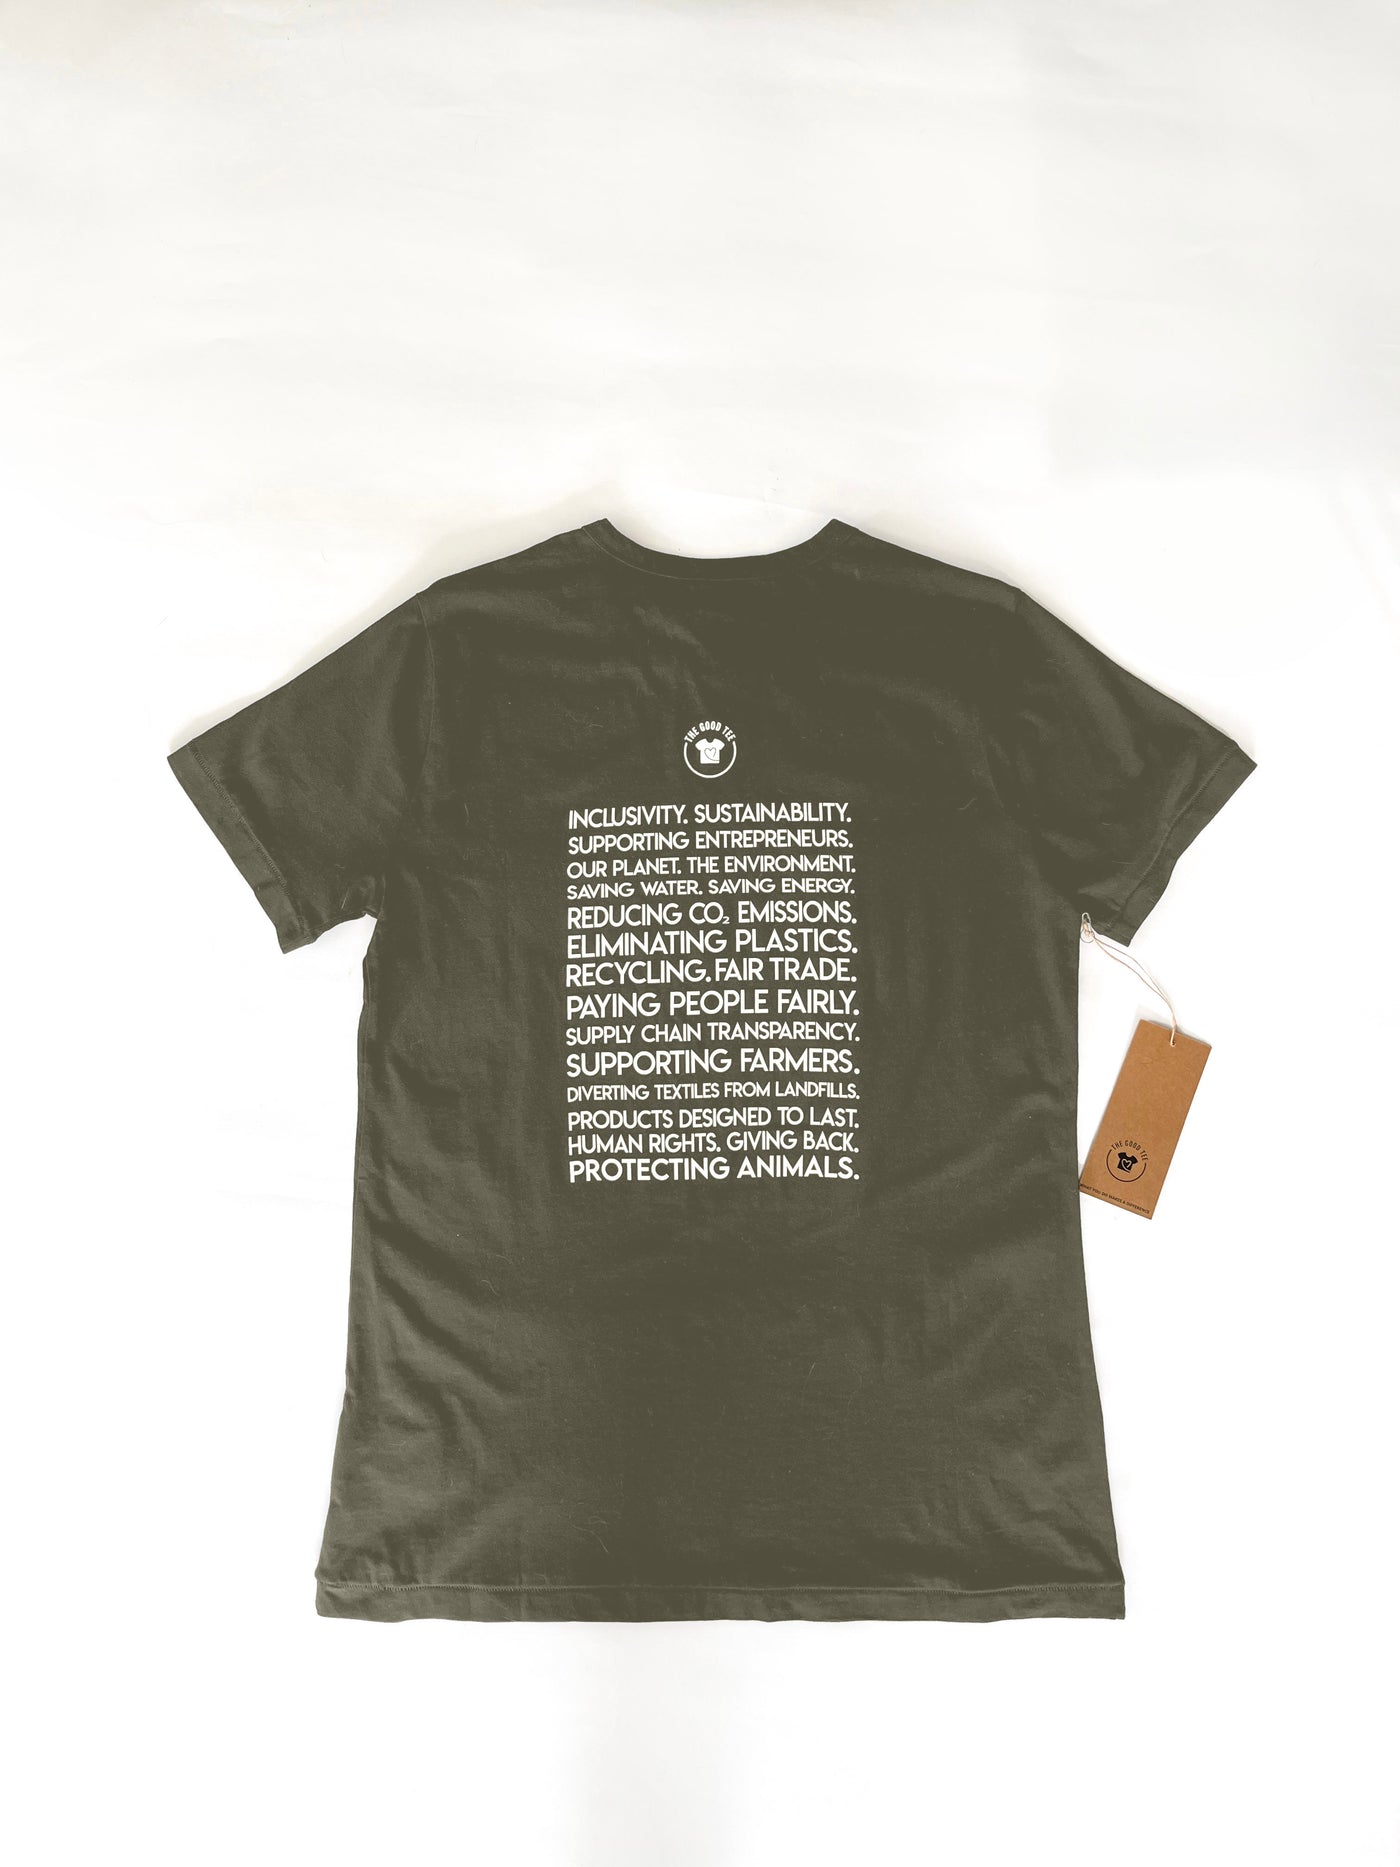 The Activist -  Sustainable Holiday Kit [PRE-ORDER]